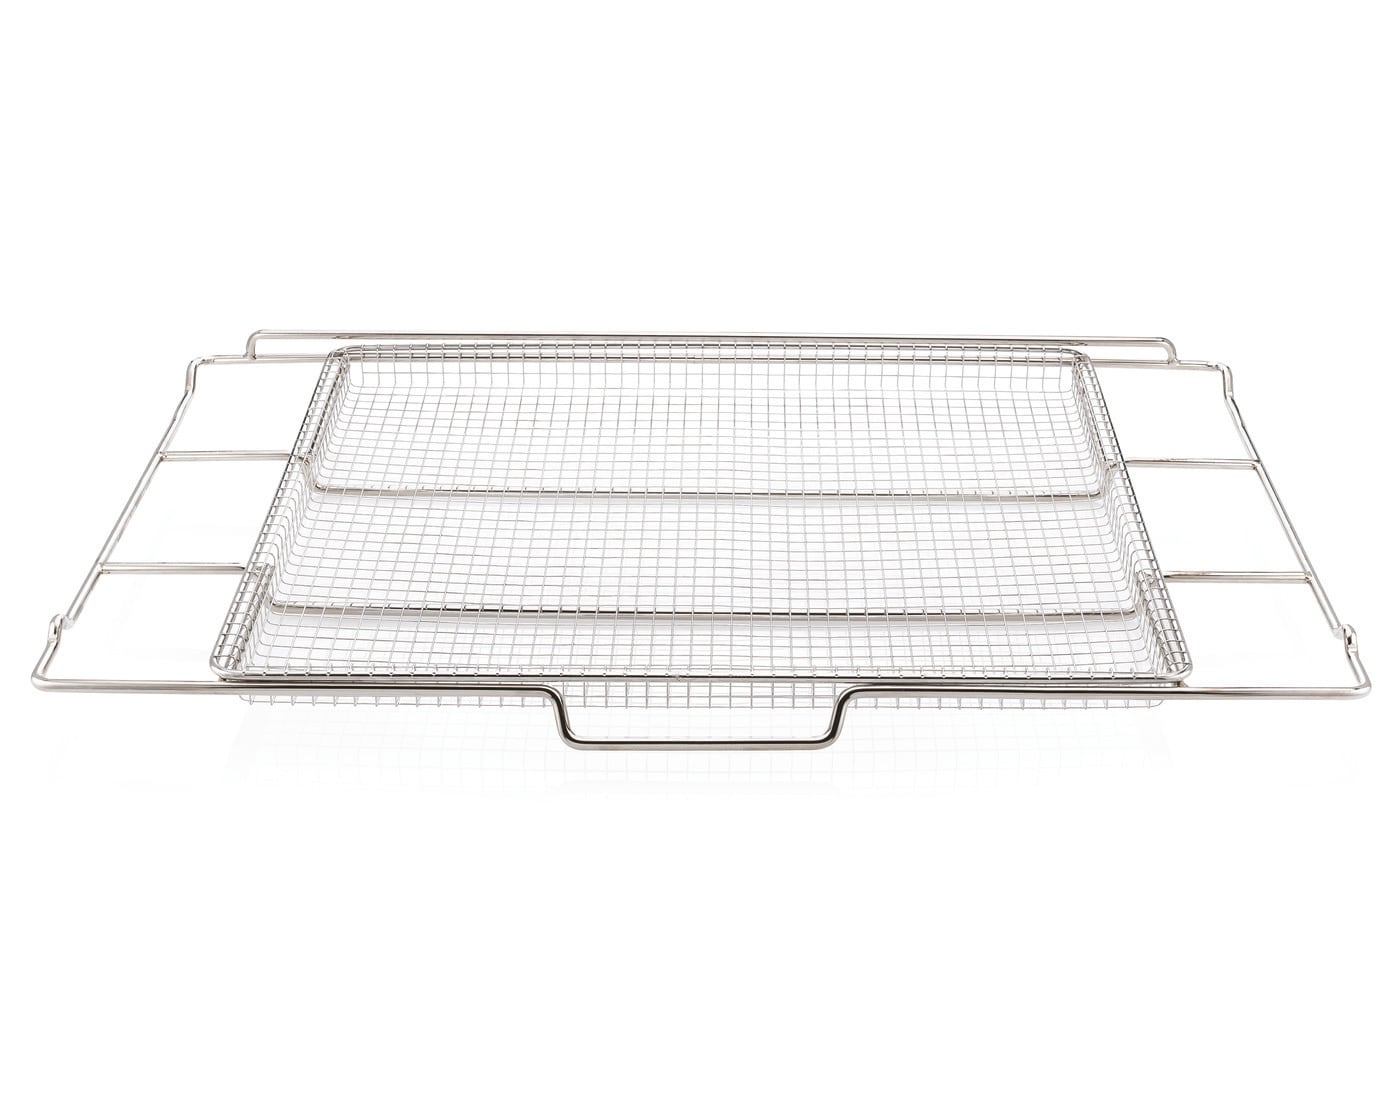 Frigidaire AIRFRYTRAY Ready Cook Oven Insert, Silver Basket: 18.4” x 15.3”  x 0.8”, Rack: 24.1” x 15.3”